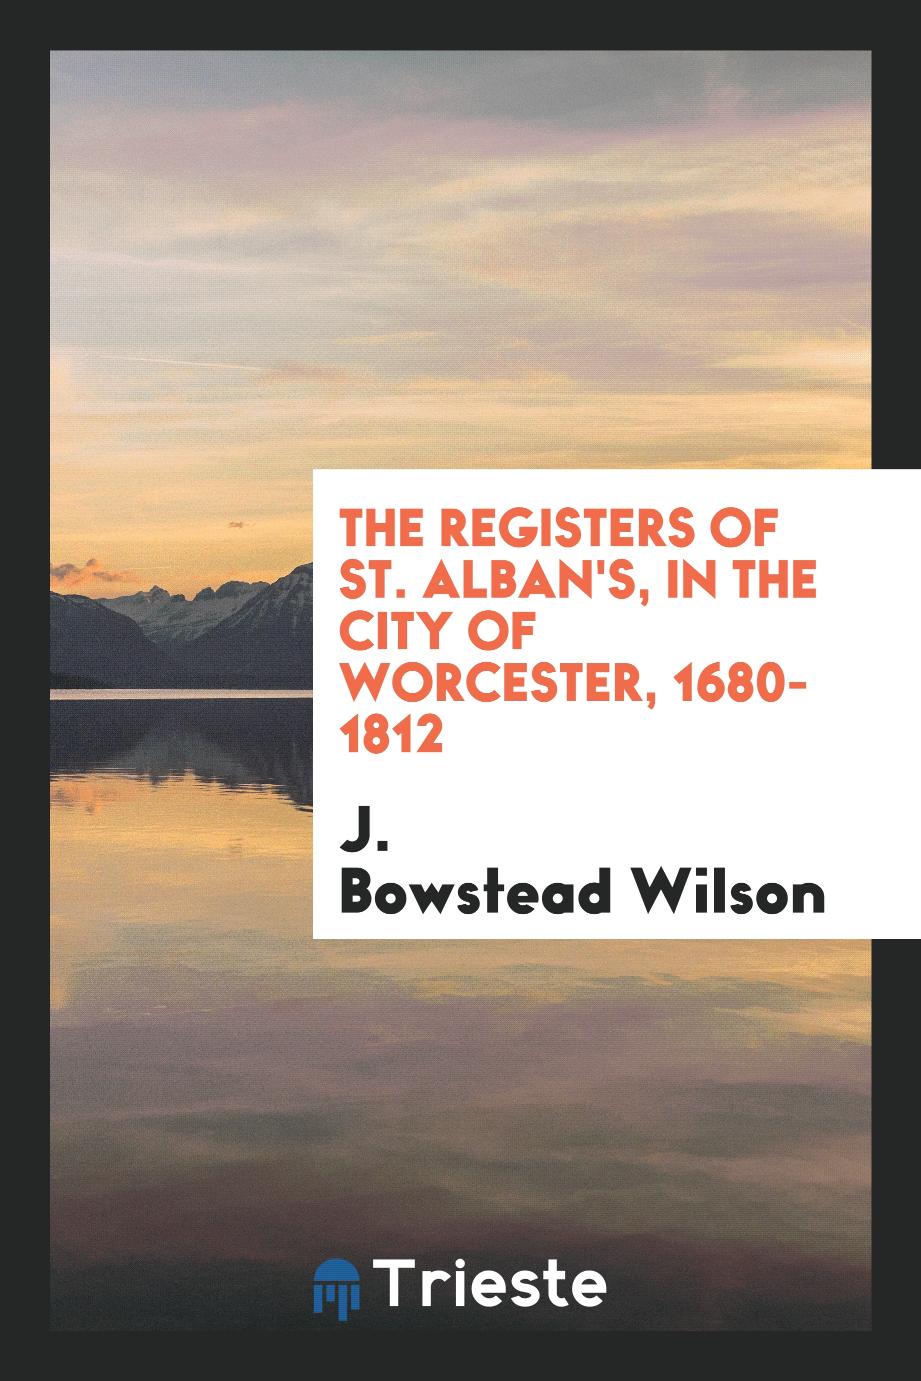 The Registers of St. Alban's, in the City of Worcester, 1680-1812